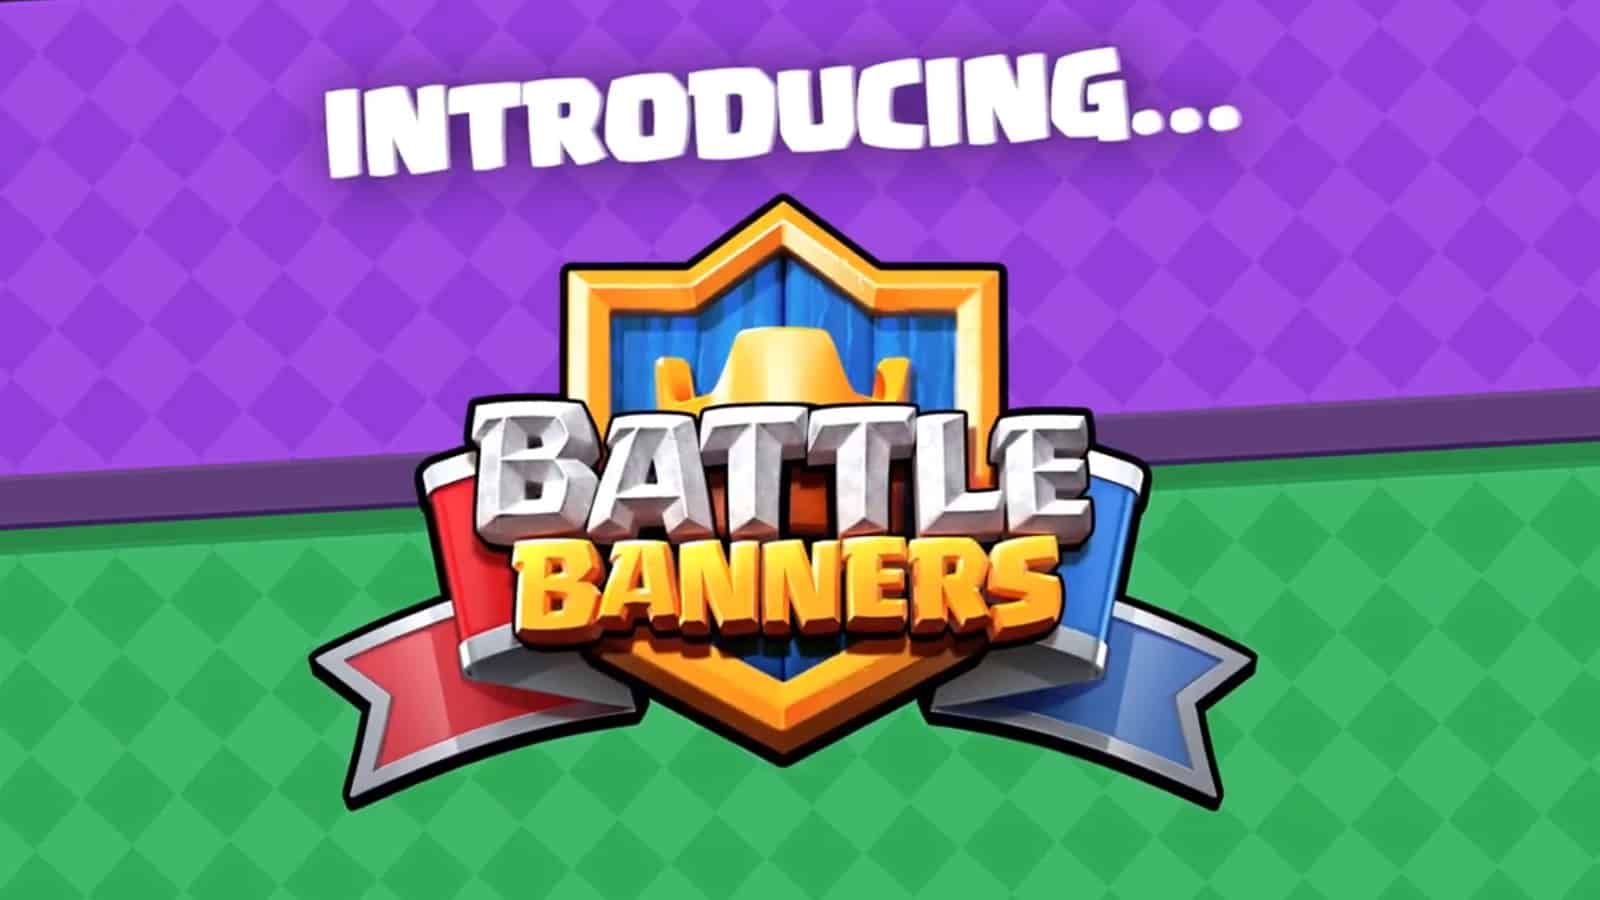 cover art for the introduction of Battle Banners in Clash Royale with the Summer update.